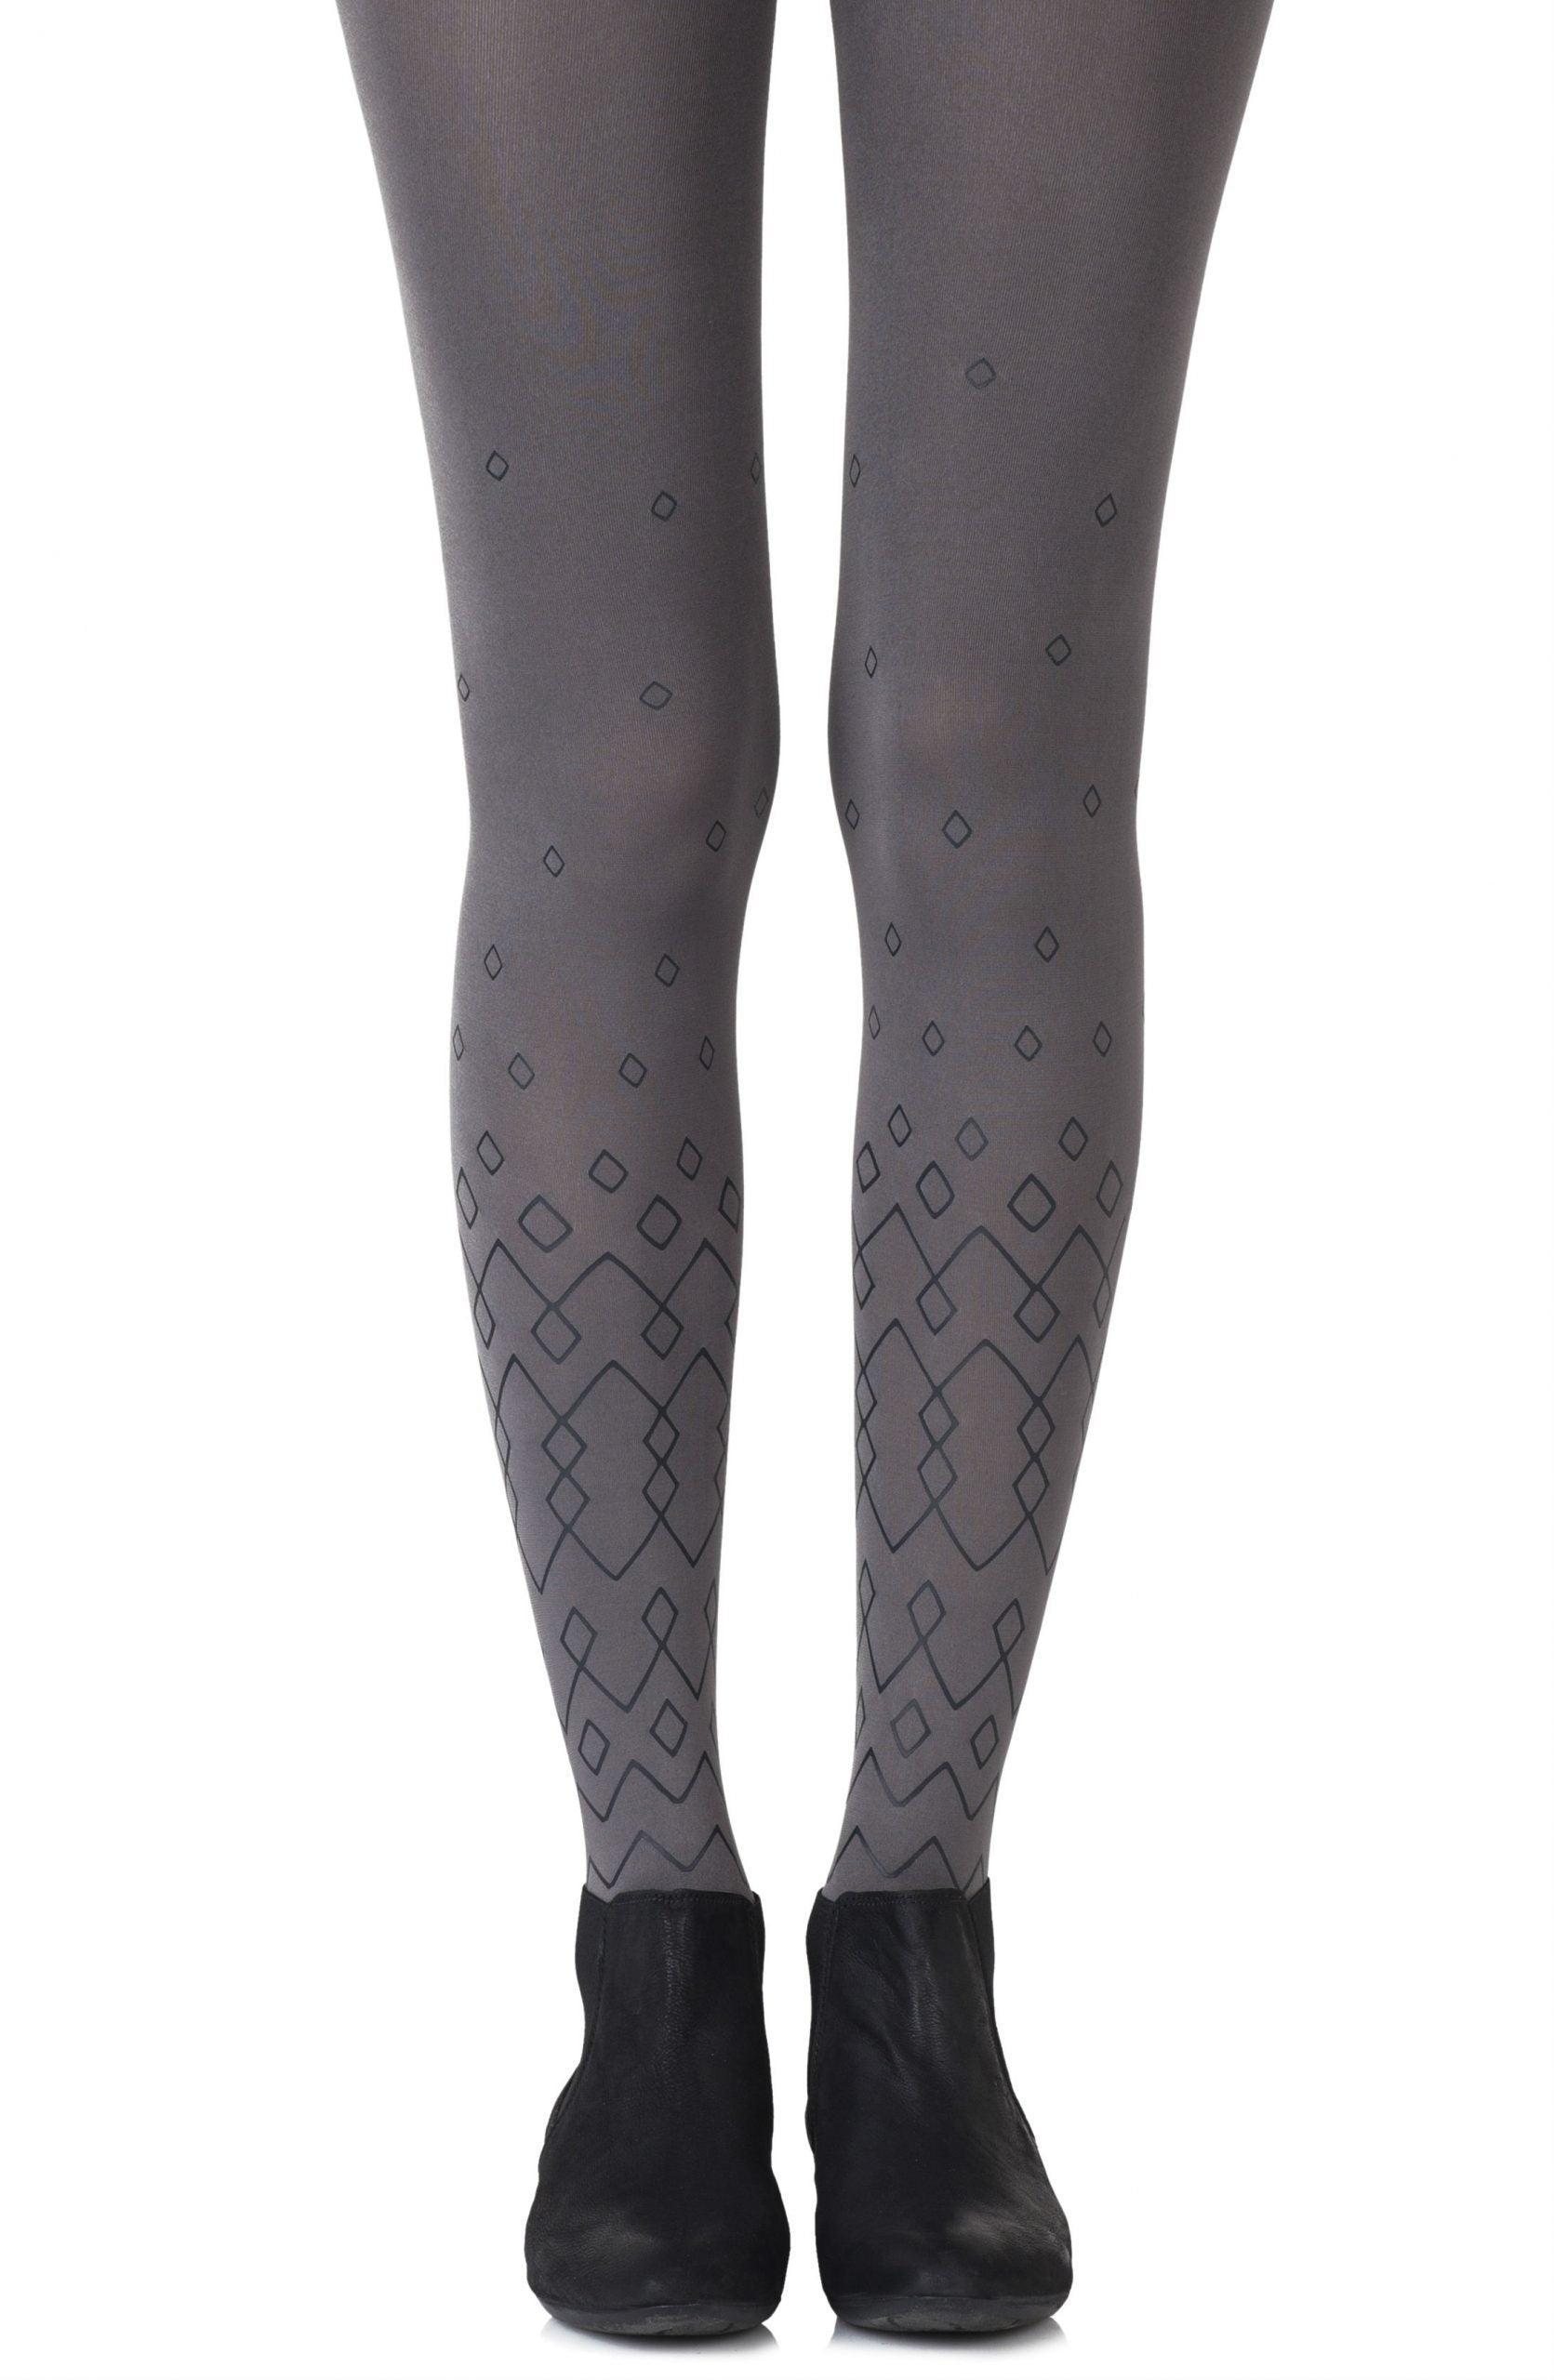 Zohara "Diamonds Are Forever" Grey Tights - Sydney Rose Lingerie 